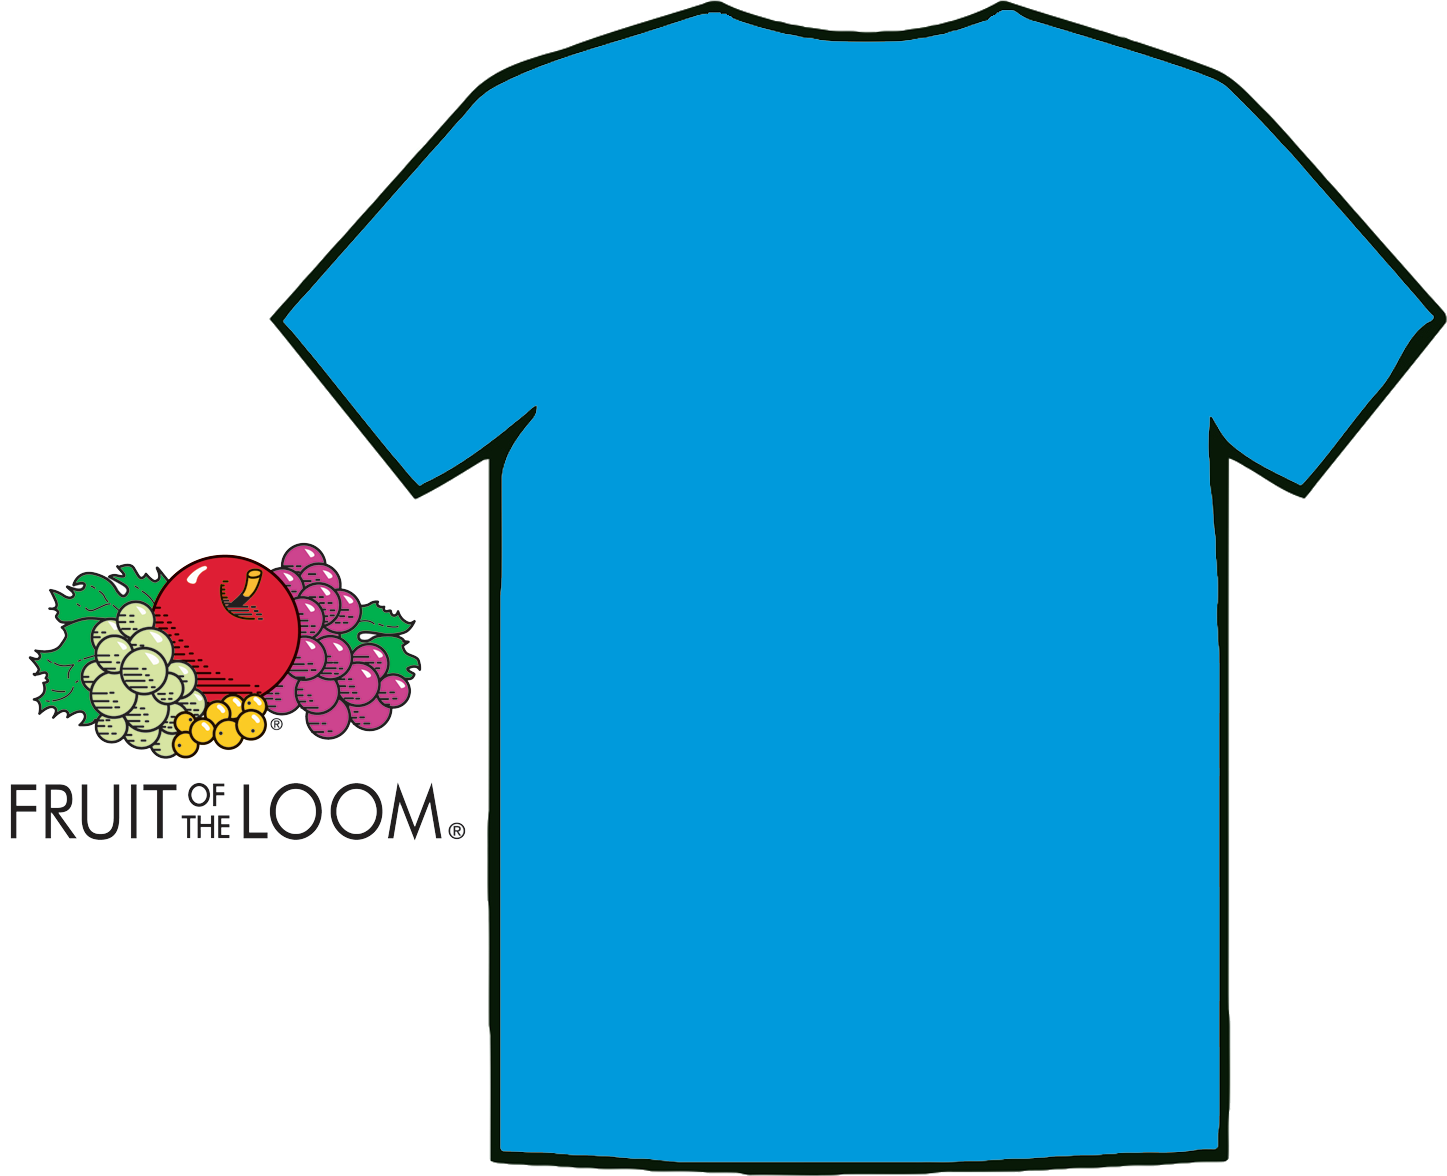 Download Images For Sky Blue T Shirt Front And Back | Fashion's ...